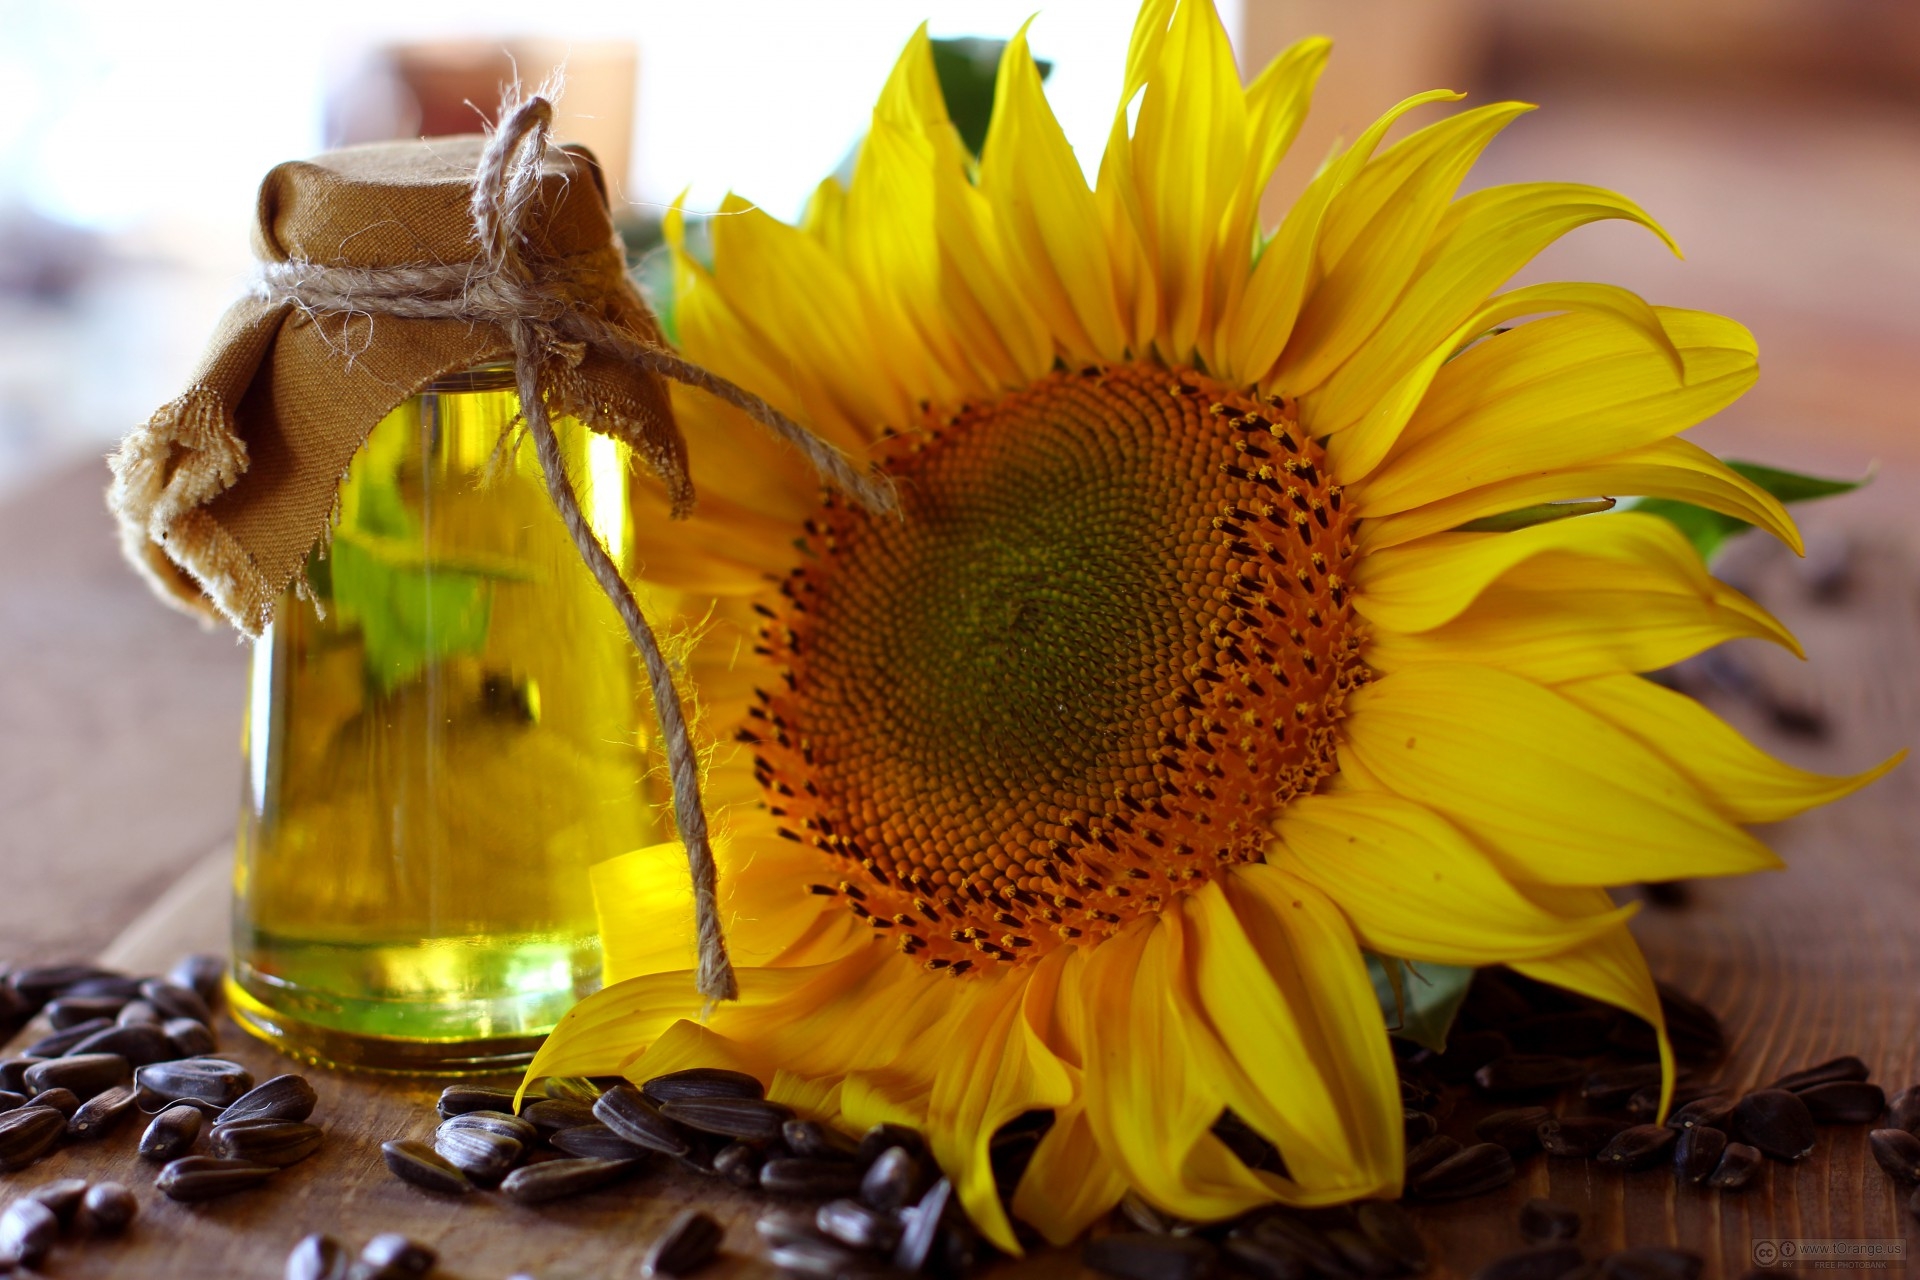 The Egyptian GASC bought 35 thousand tons of sunflower oil at a tender, 2.8% cheaper than in November